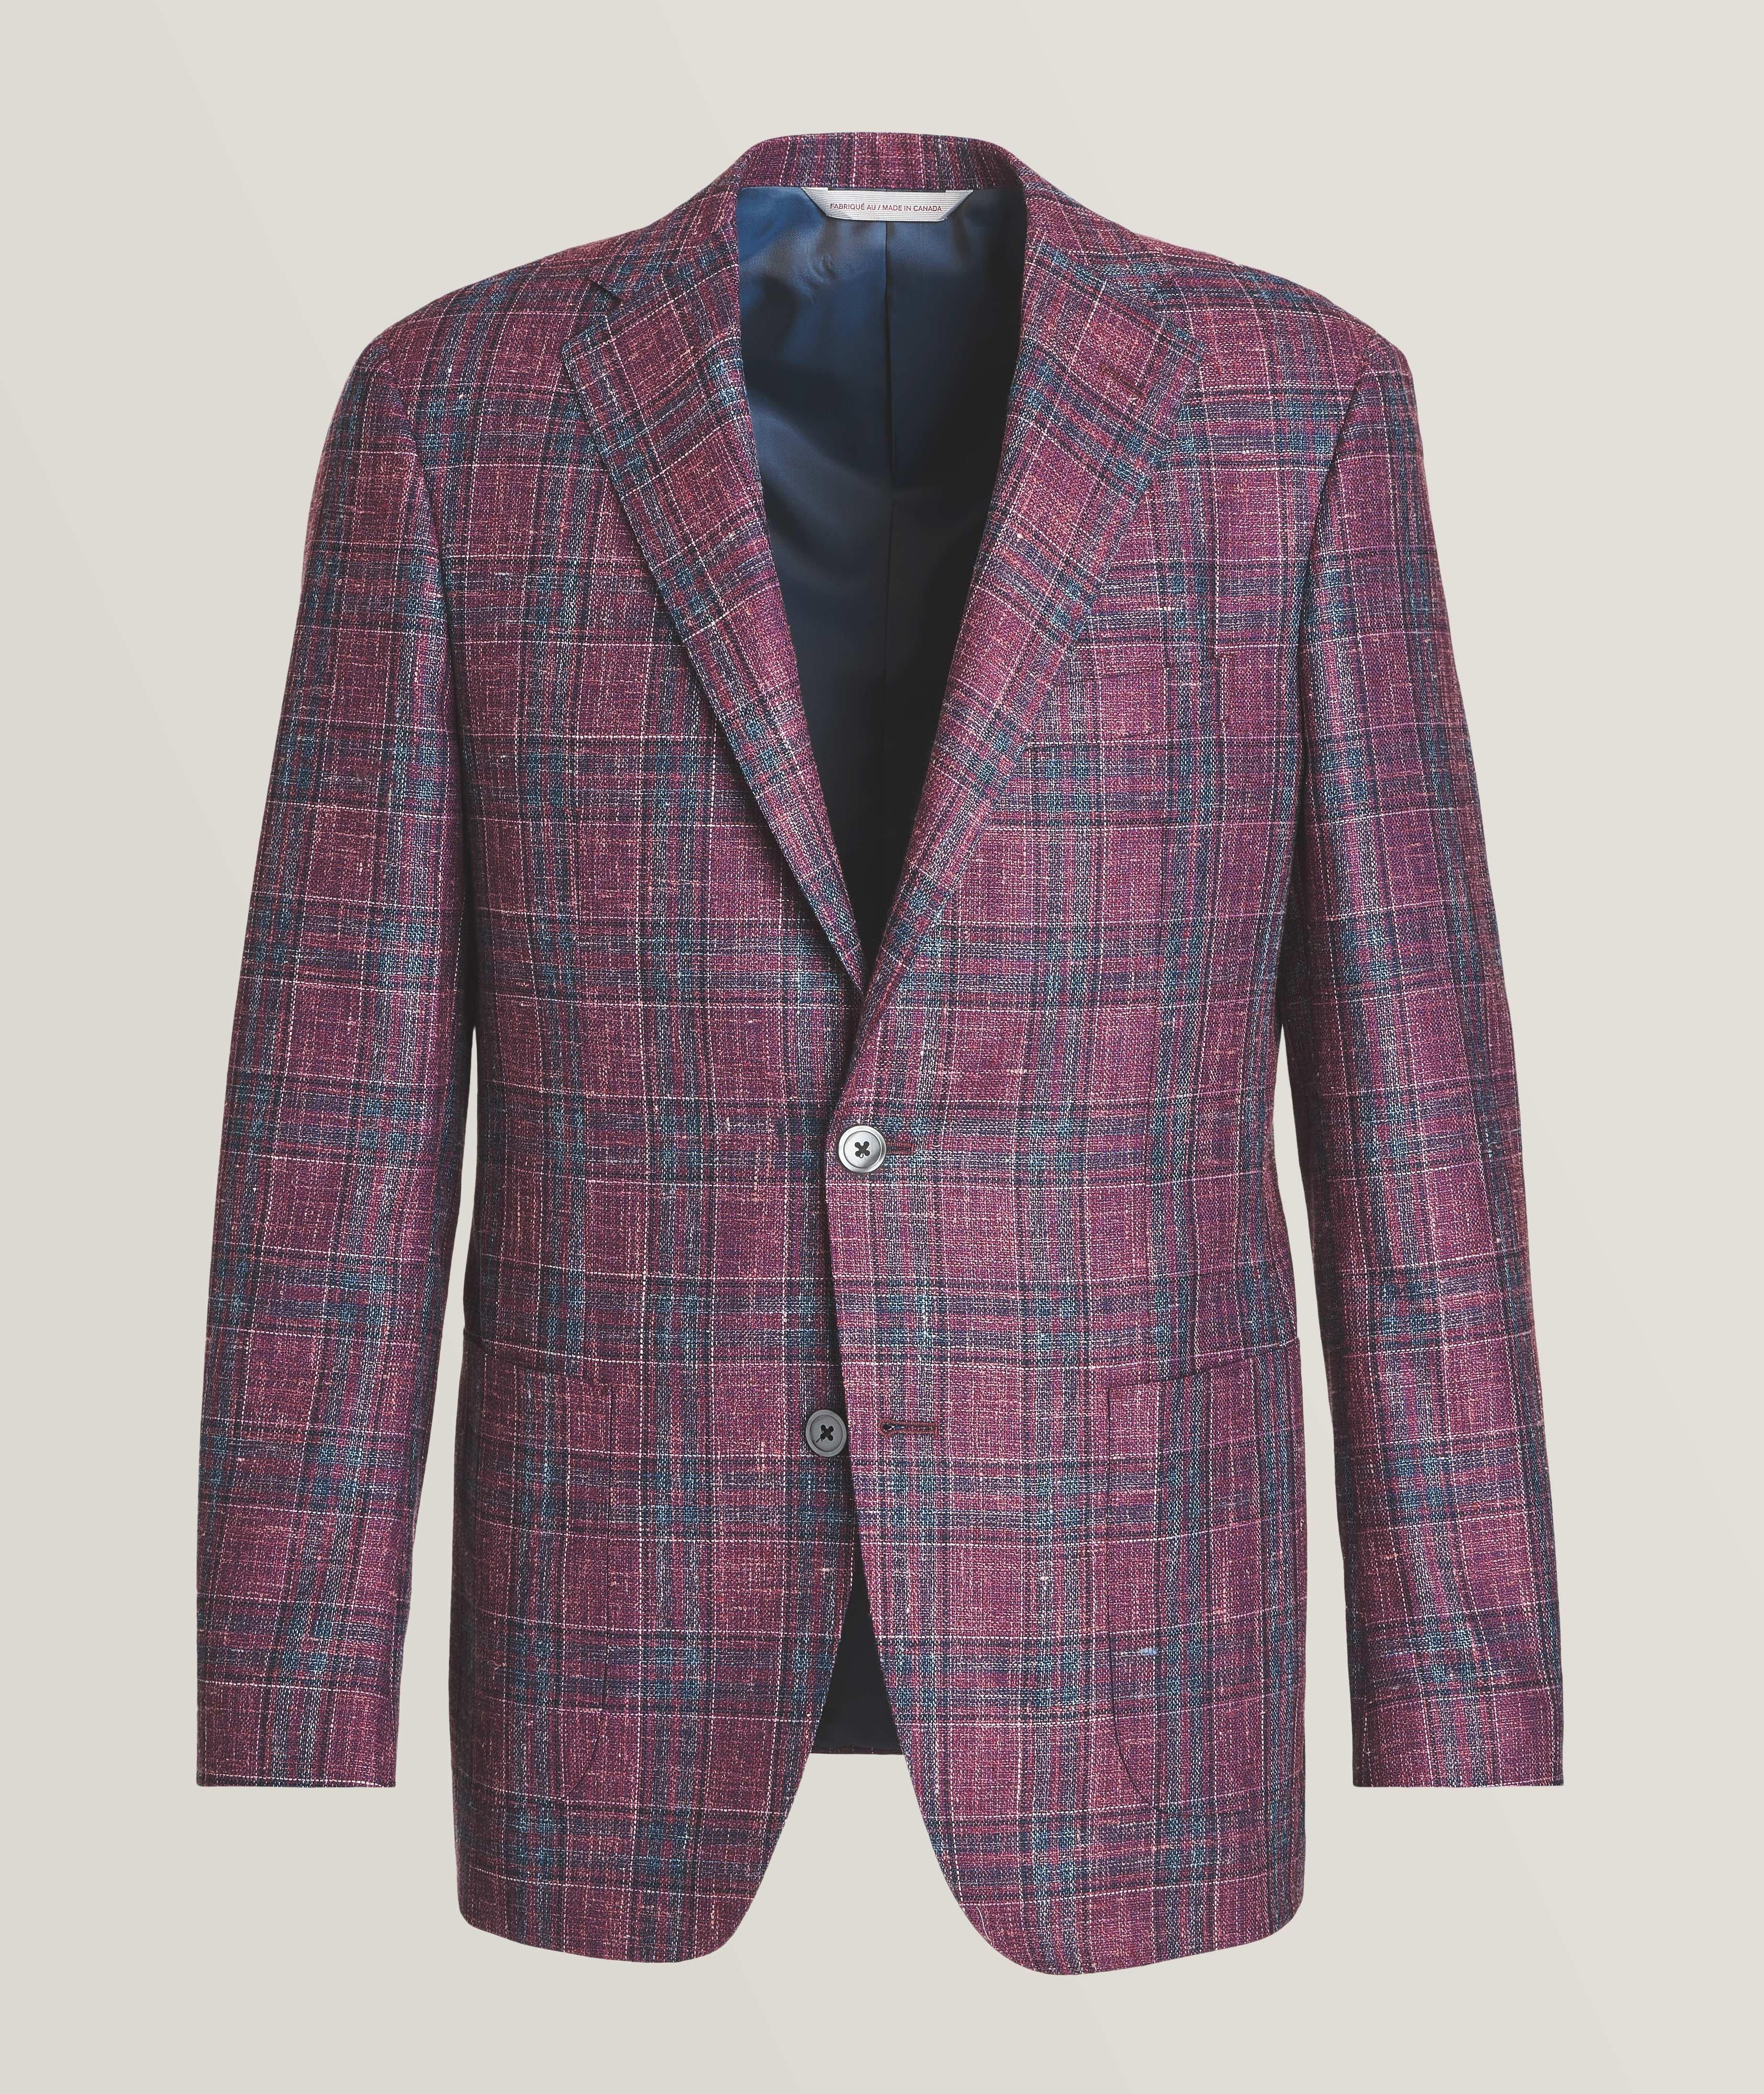 Checked Pattern Wool Blend Sport Jacket image 0